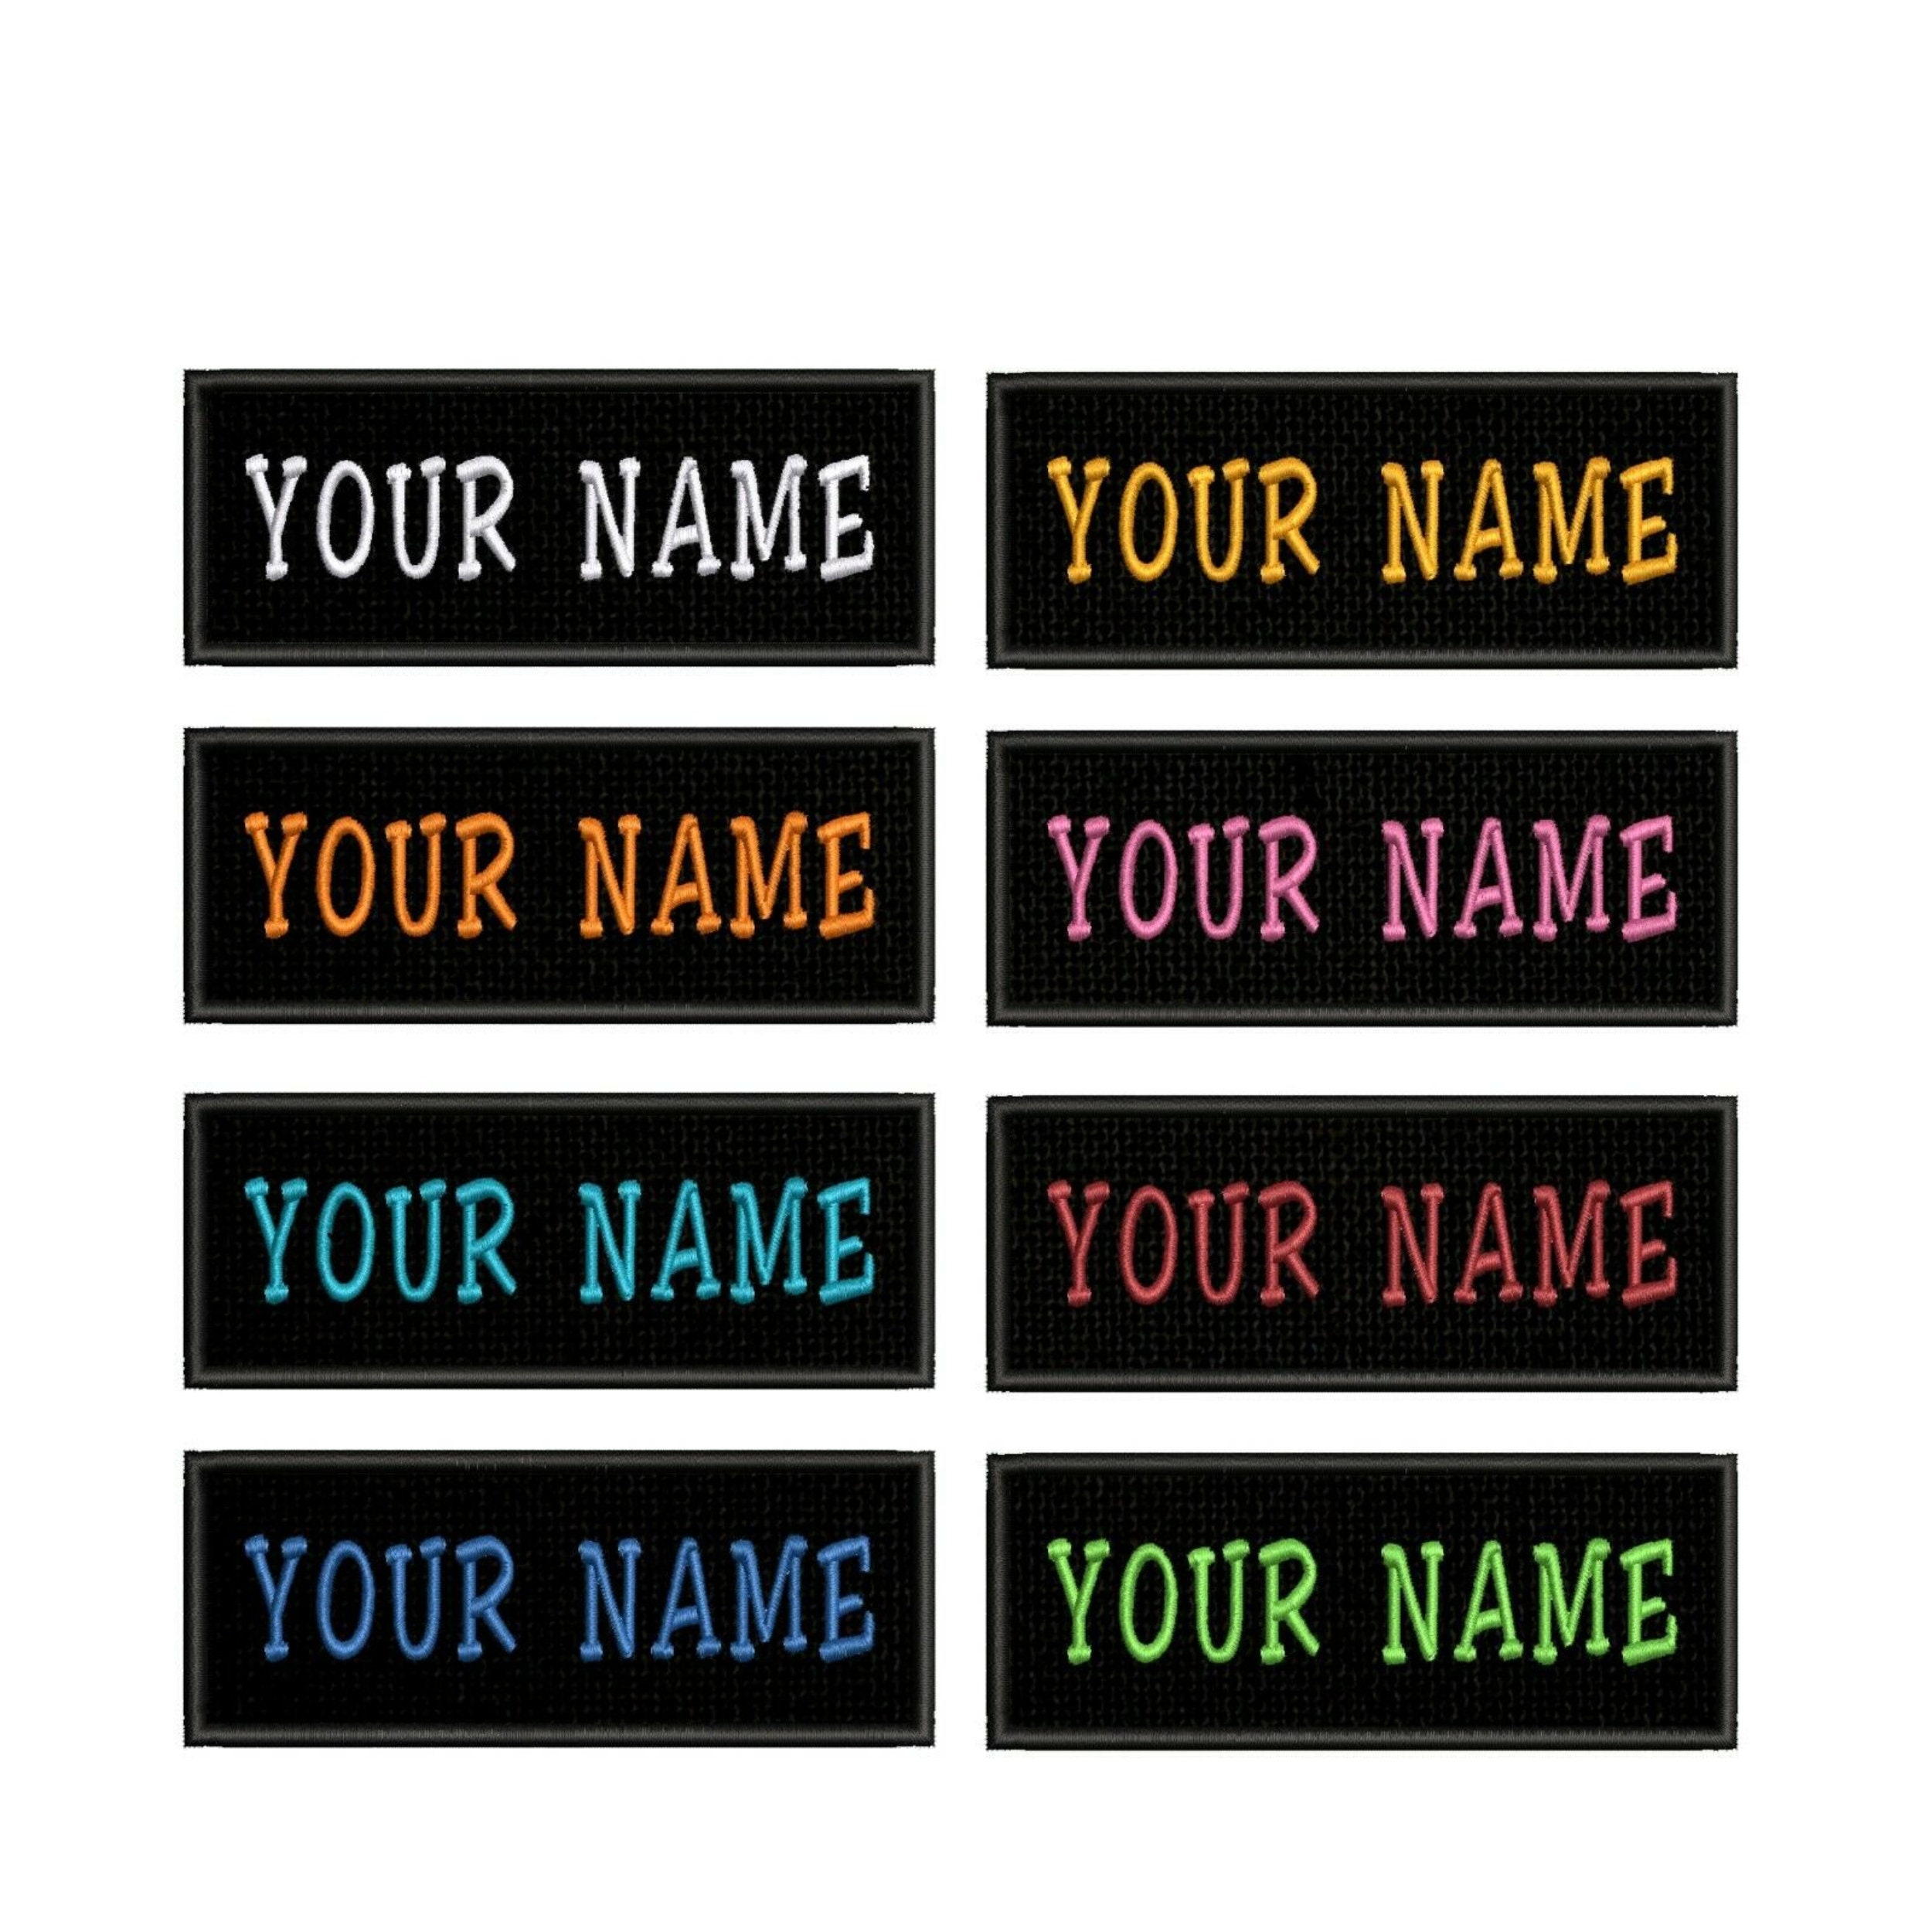 Custom Embroidered Name Tag Iron On Patch Motorcycle Biker Patches 6" x 2" B 